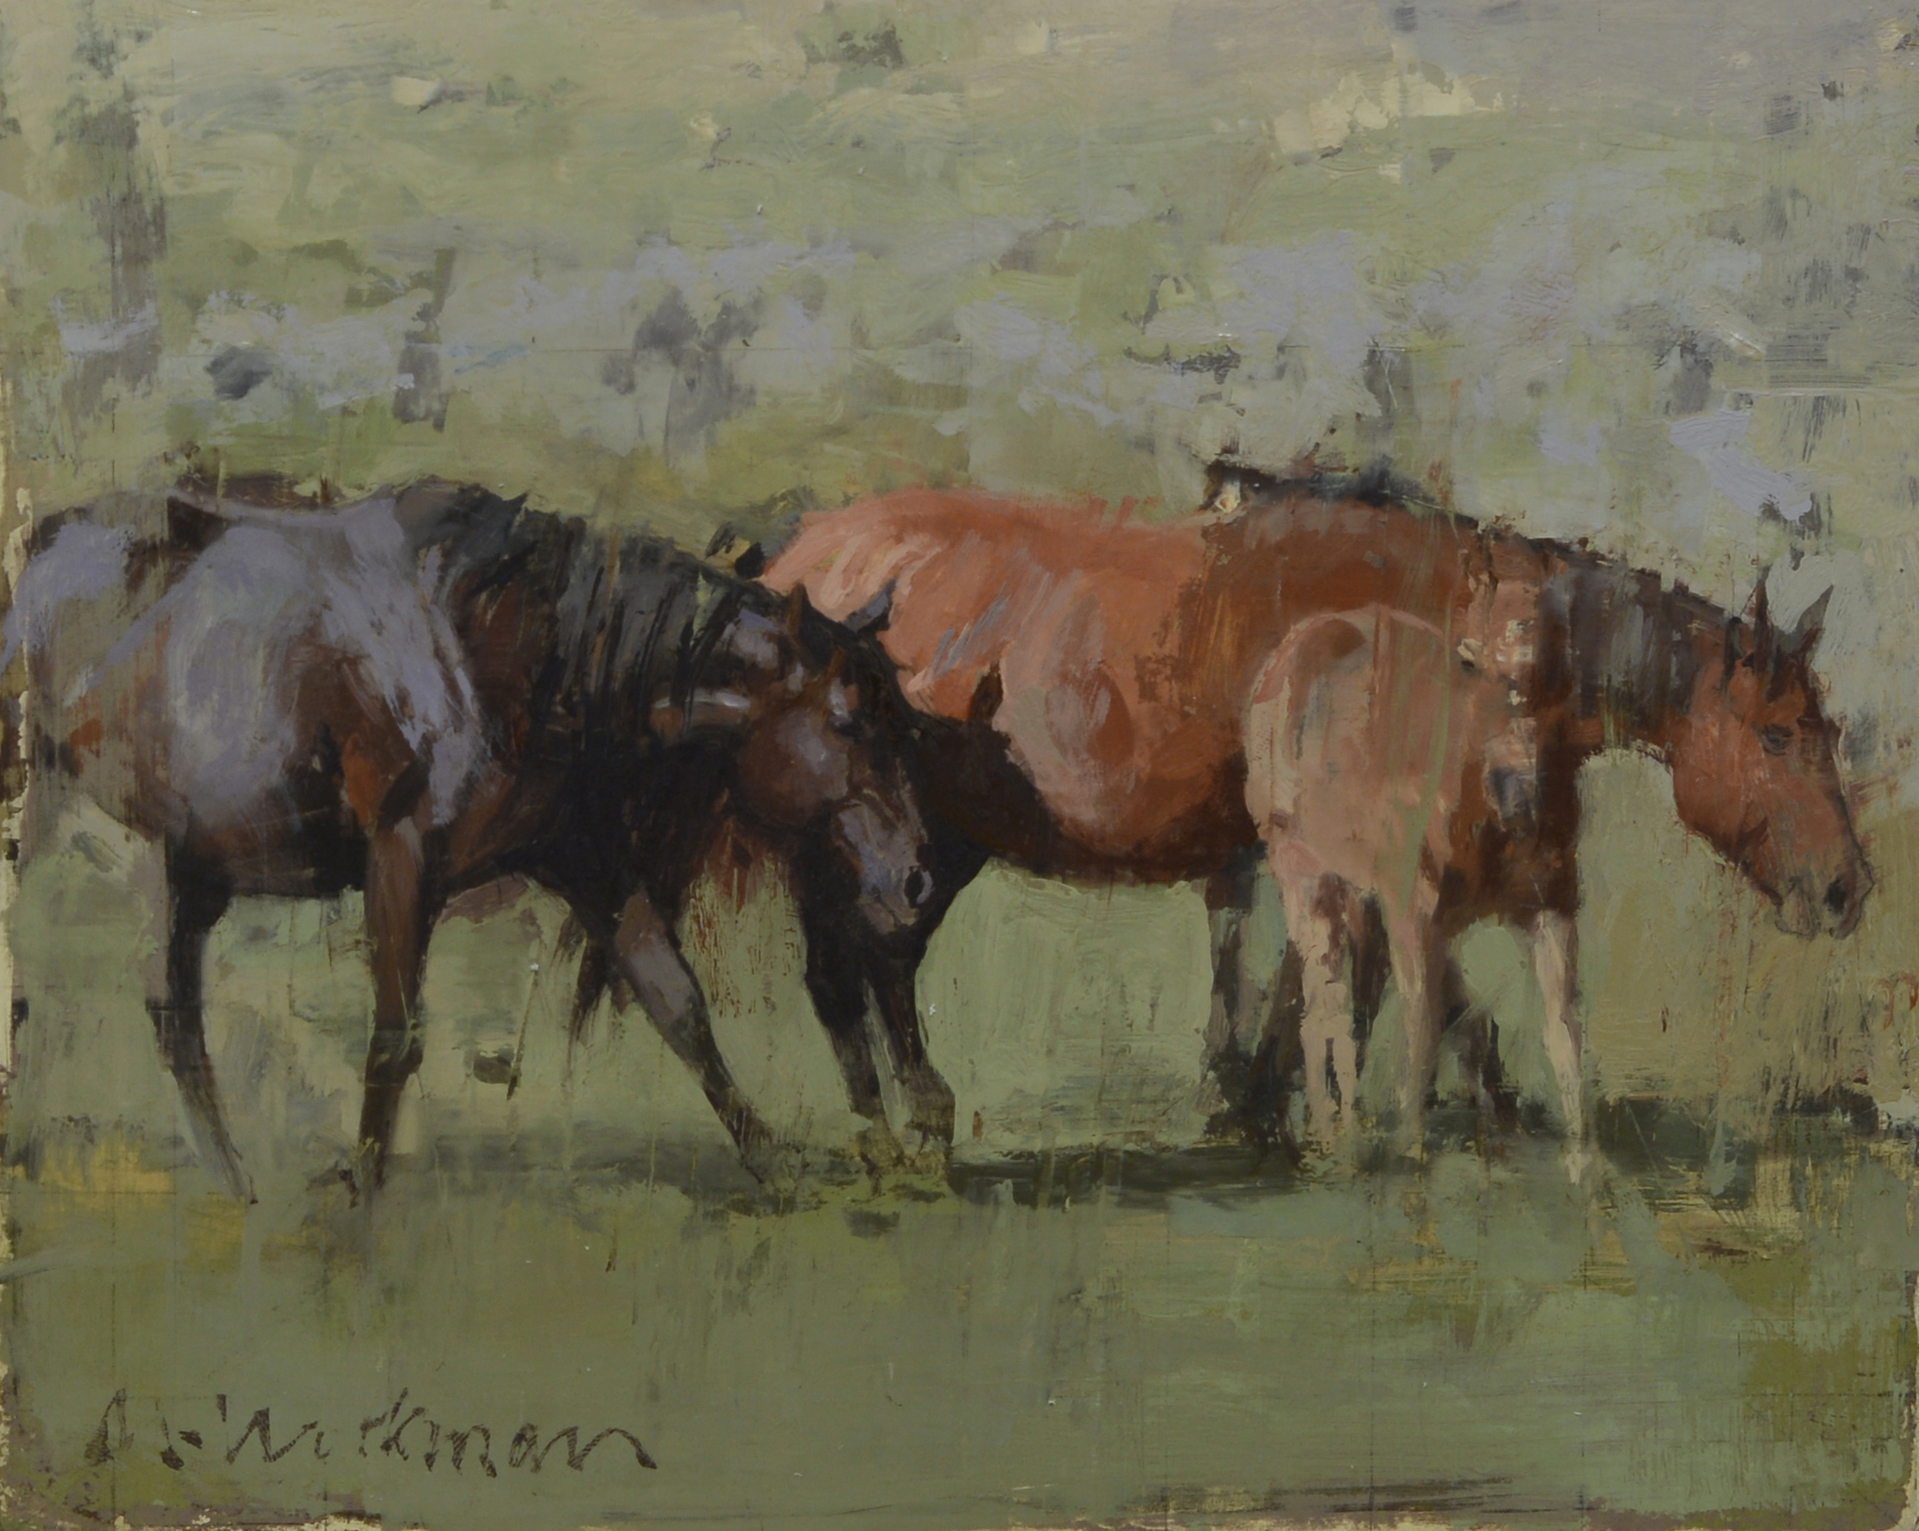 Sketch of Two Mares and a Foal by Michael Workman